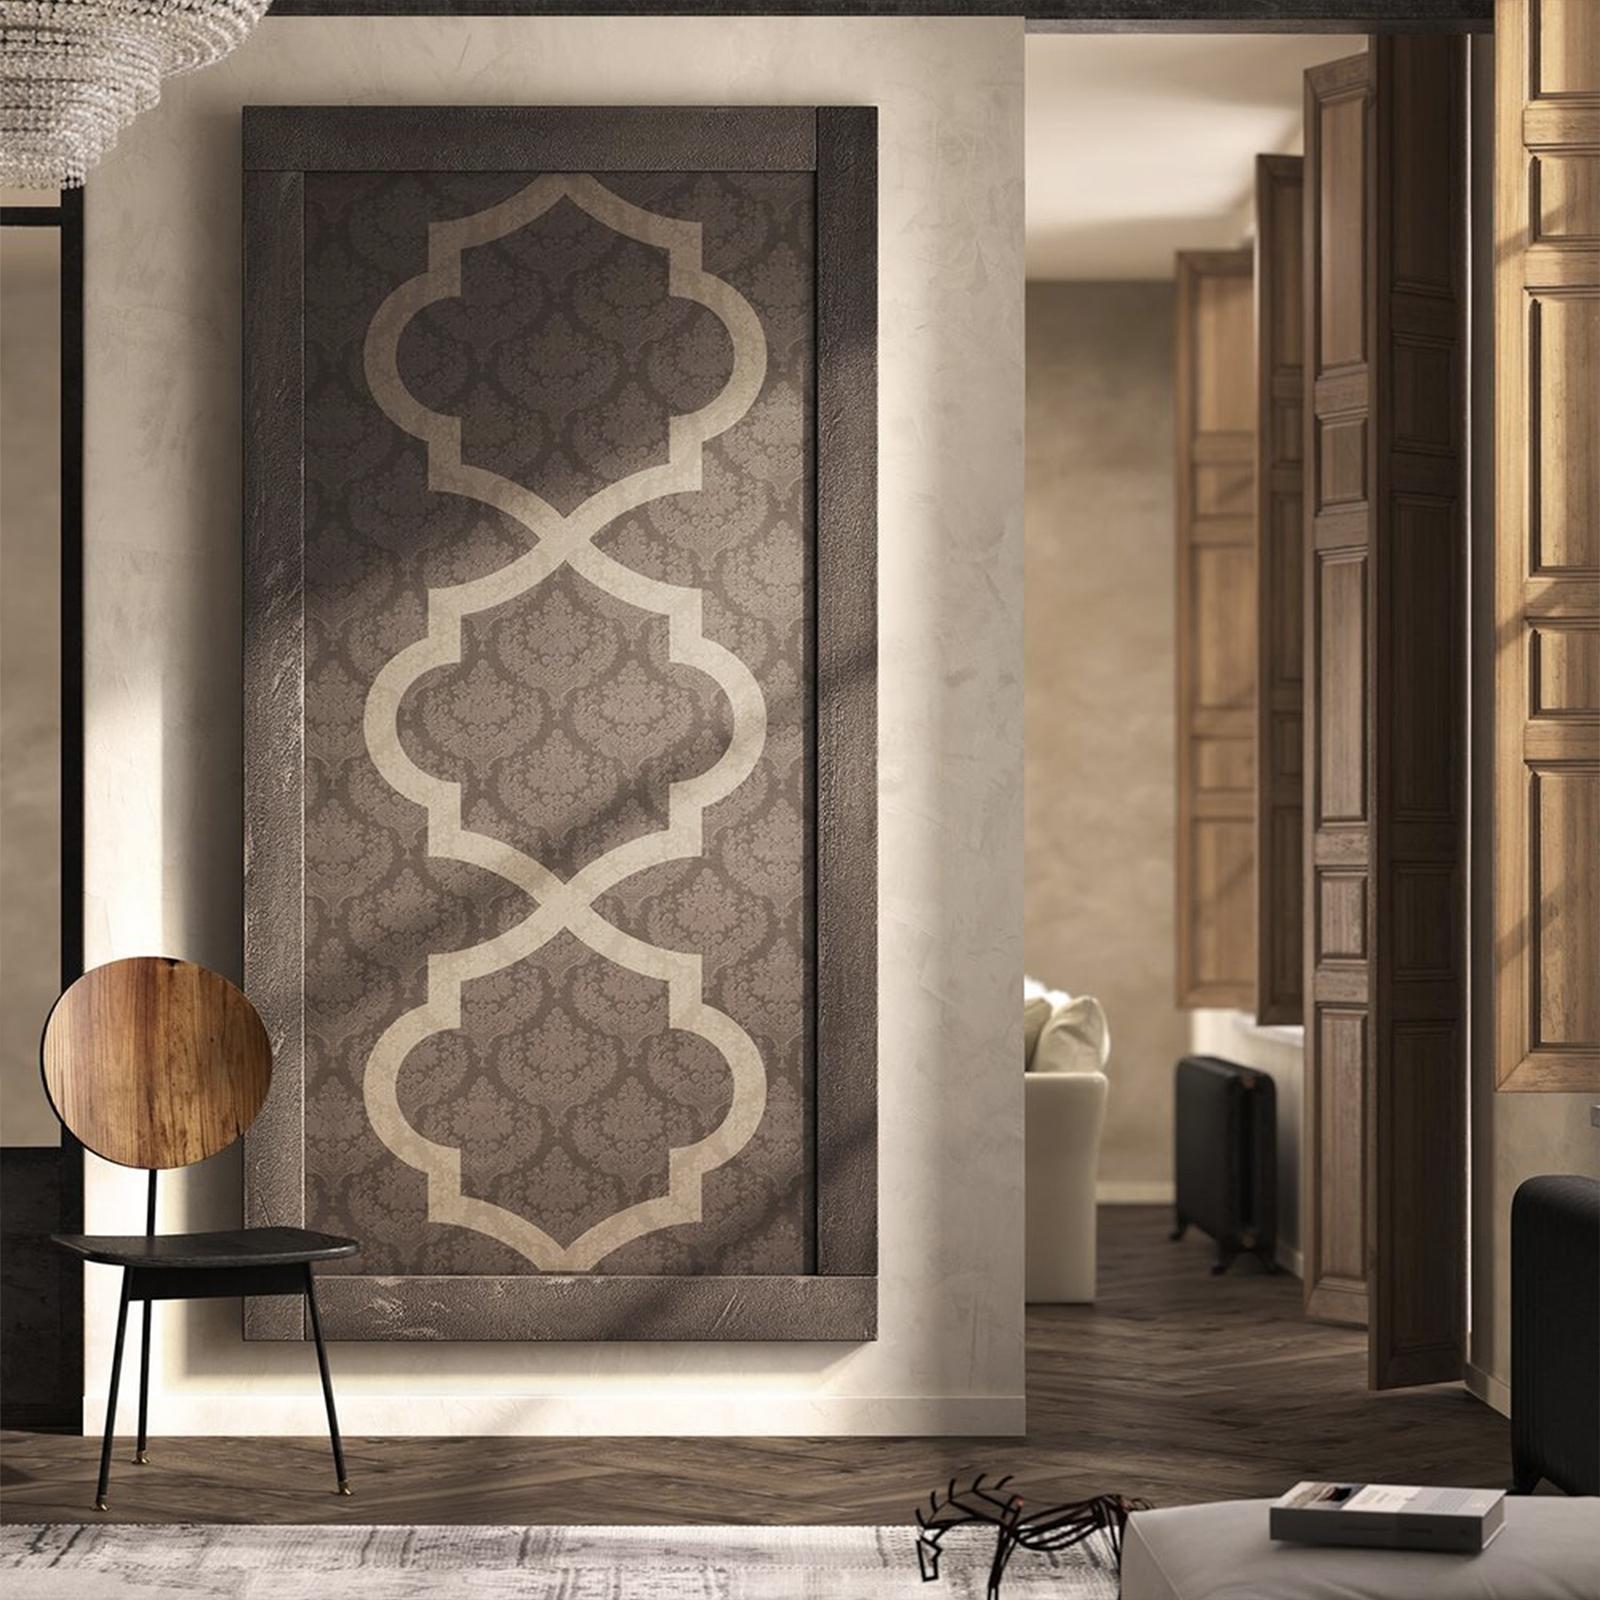 This superb decorative screen combines traditional pattern and innovative materials to create a unique and timeless piece that will enliven a modern home as well as a classic interior. Designed to be mounted on the wall and equipped with the